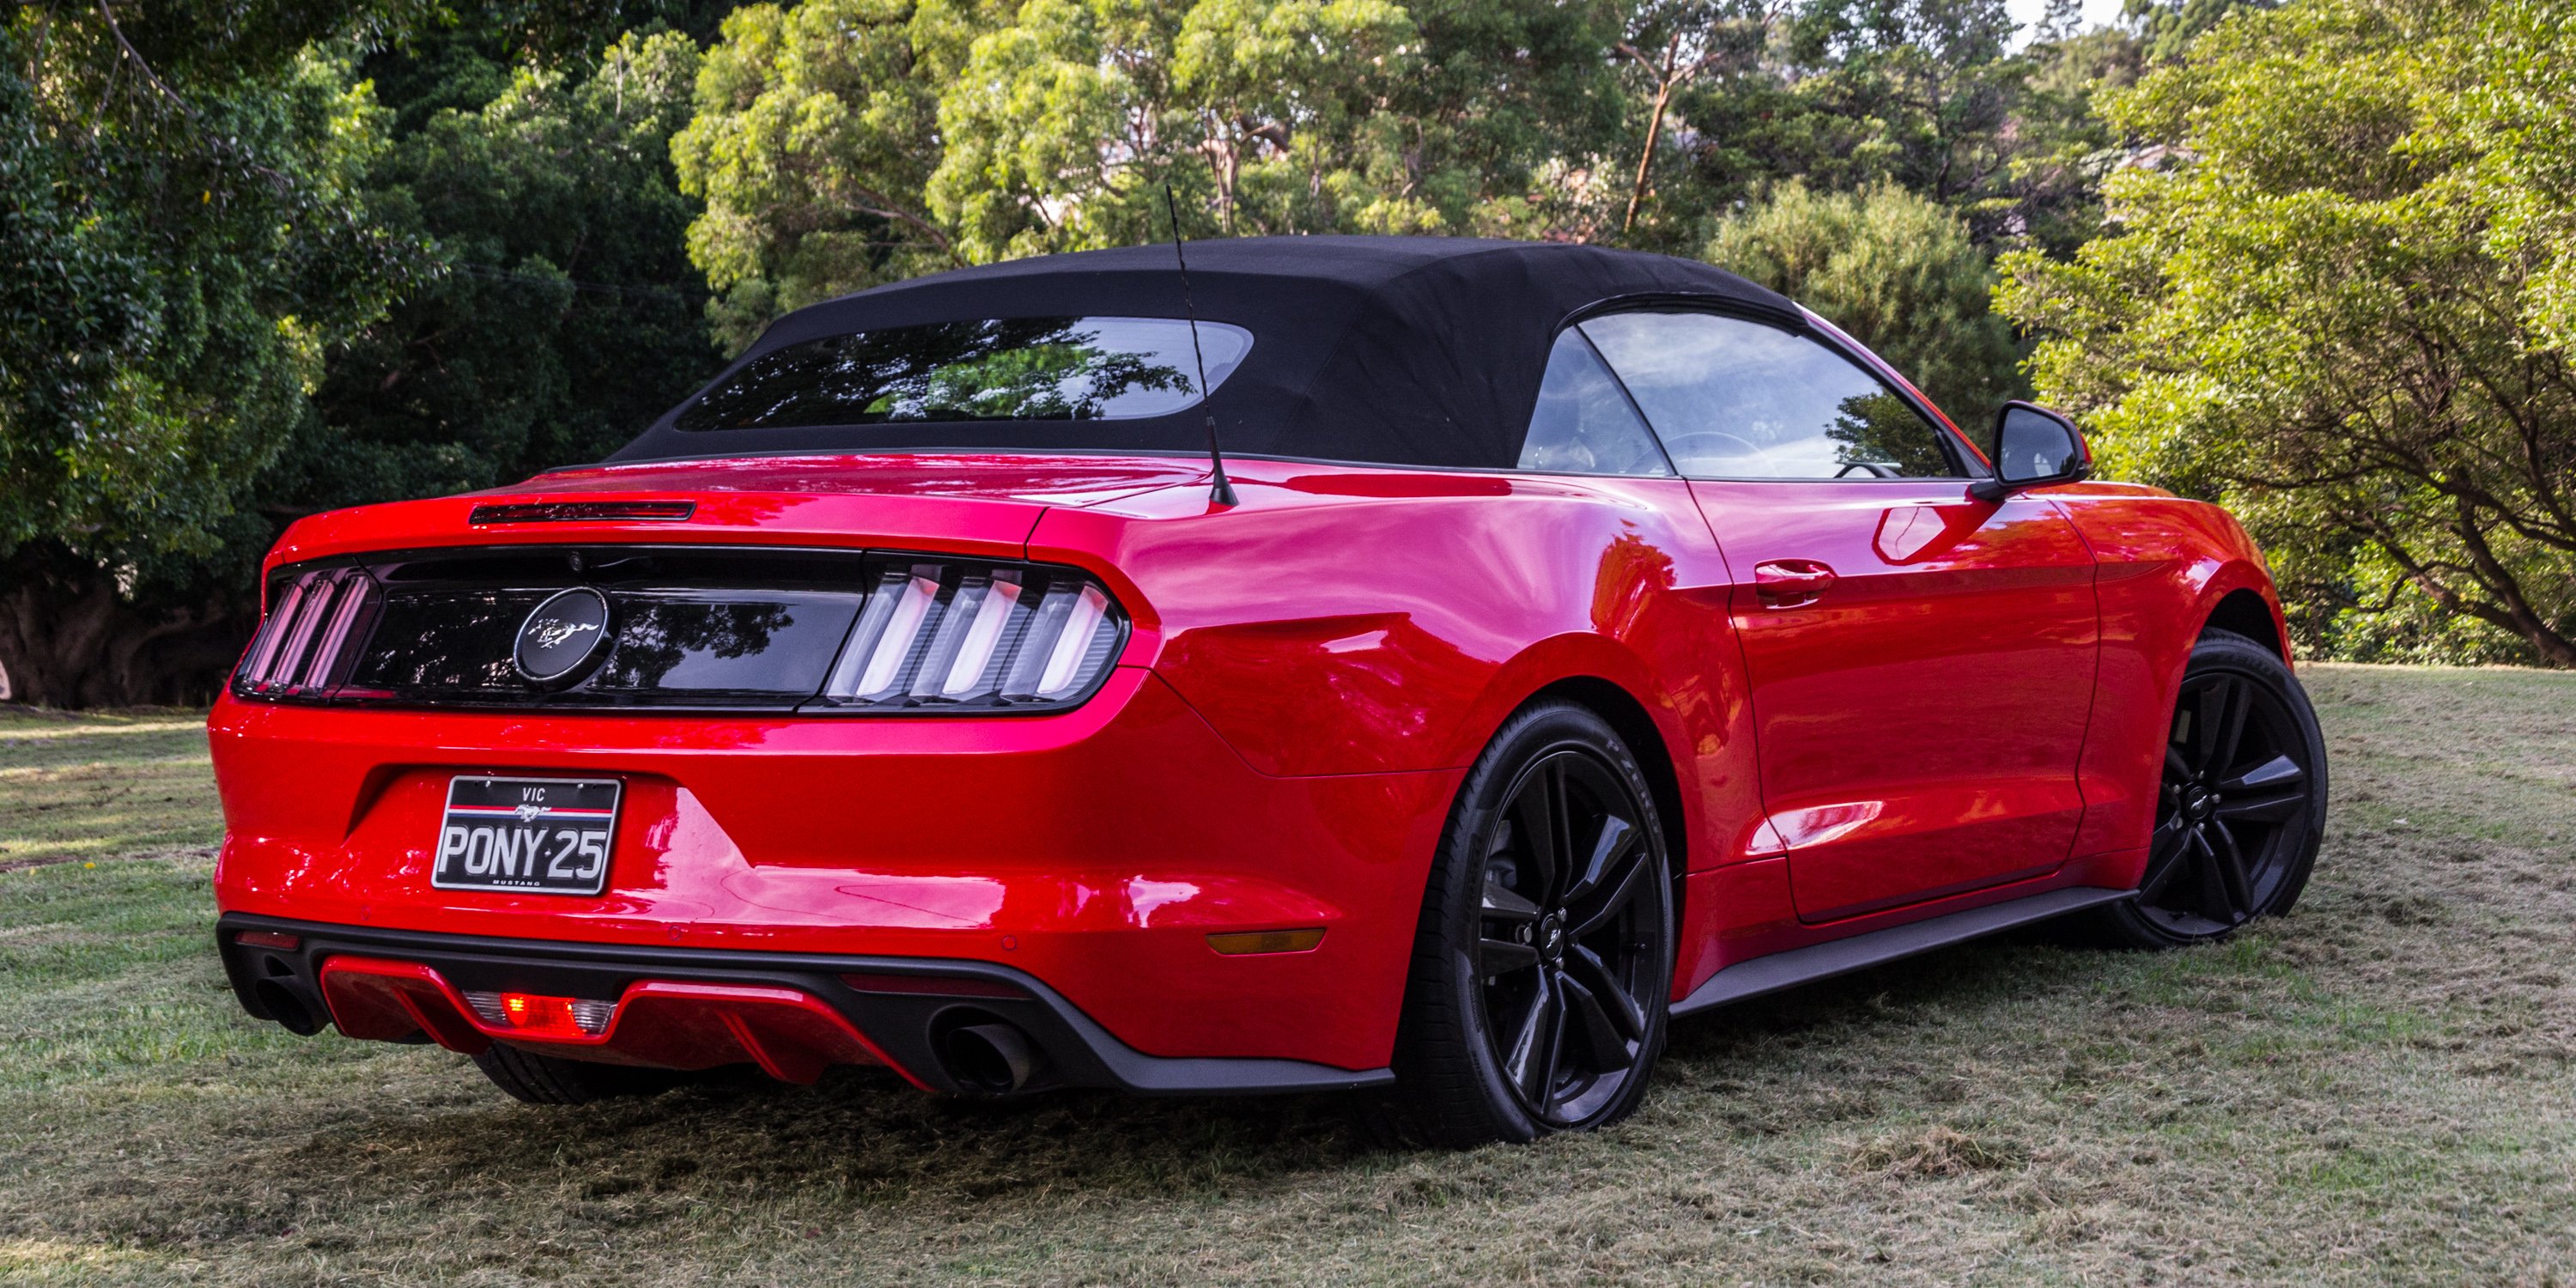 2016 Ford Mustang Ecoboost Convertible Review - photos | CarAdvice